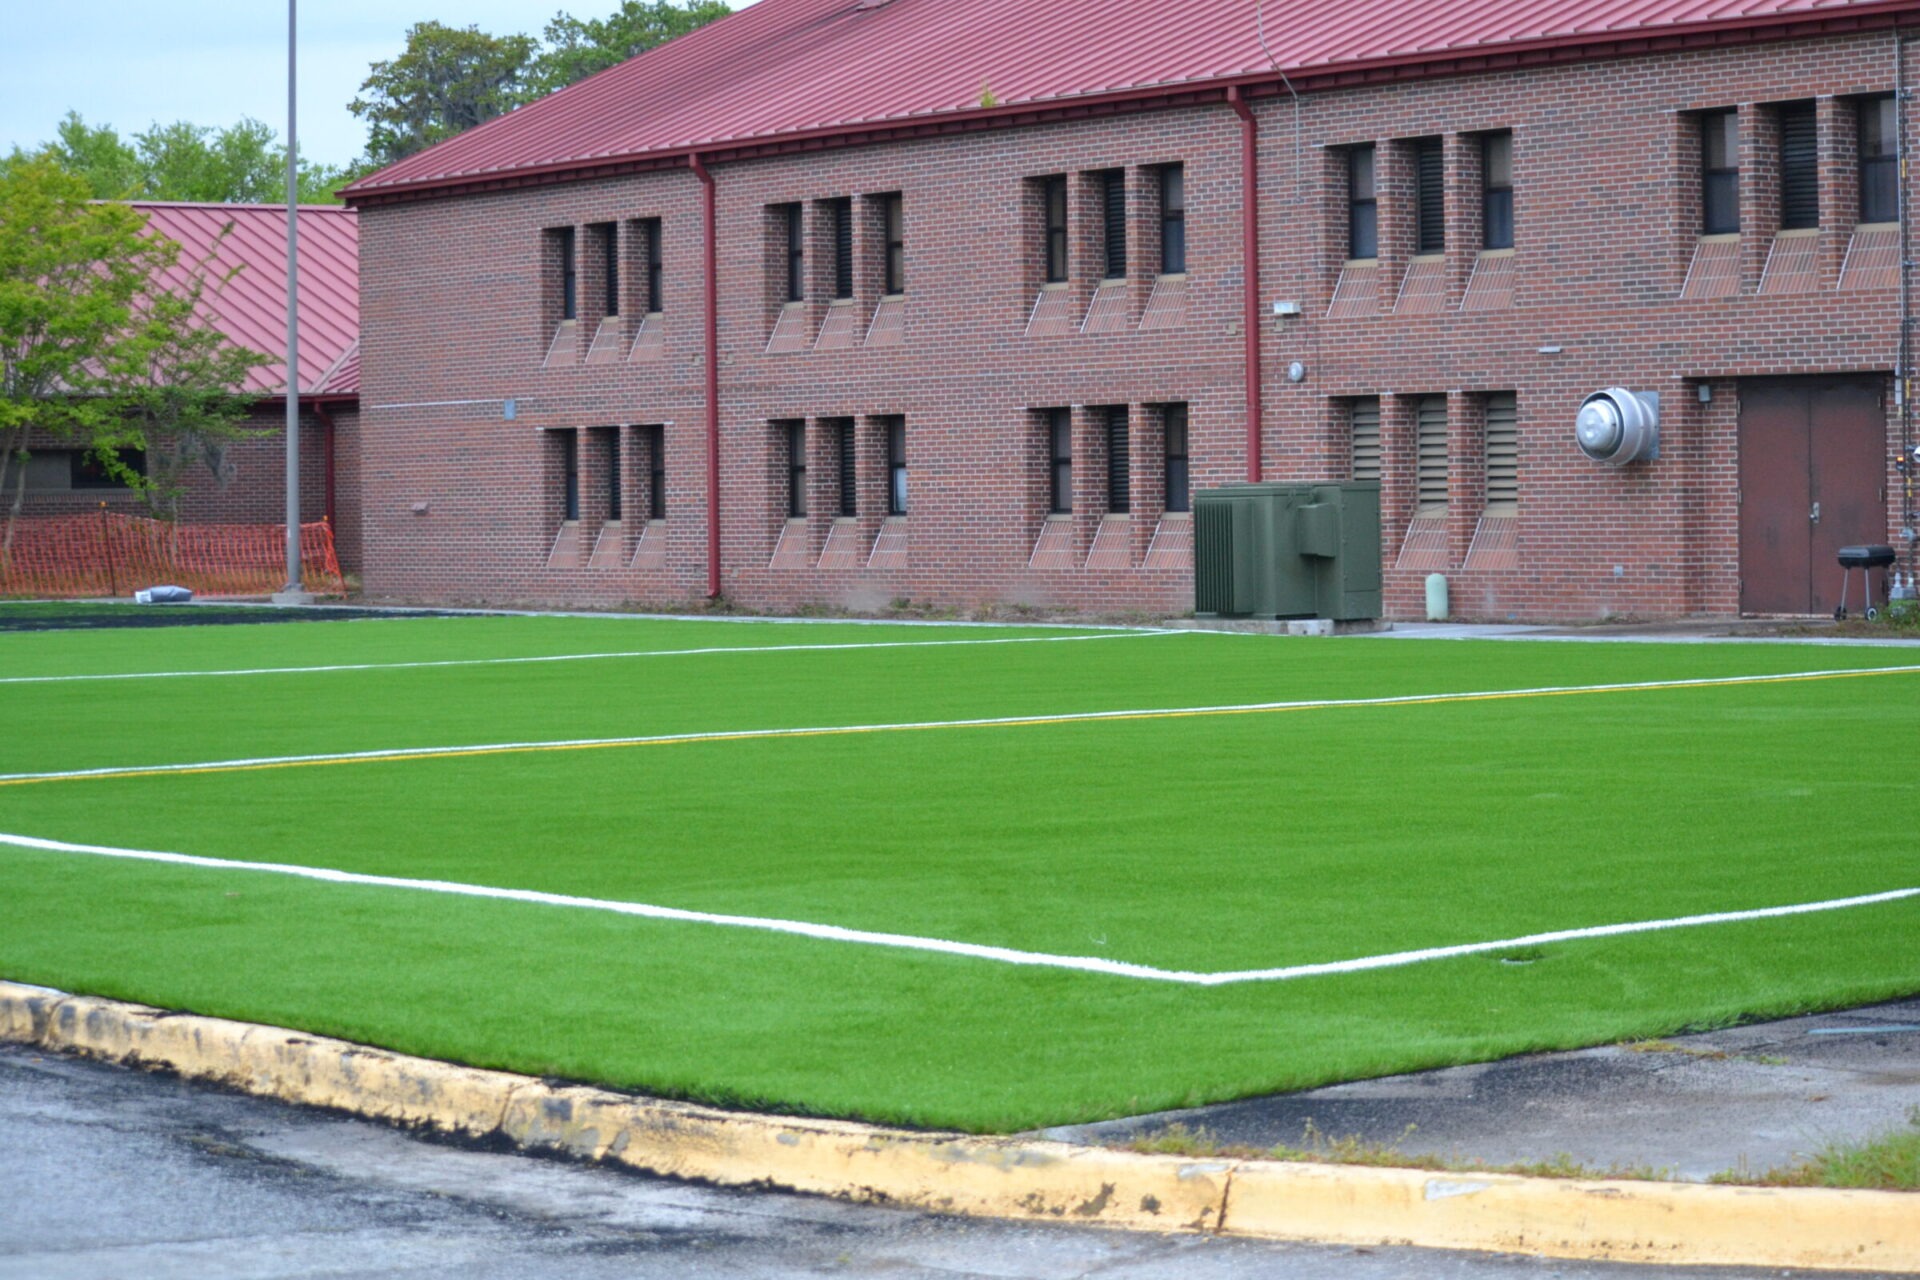 A newly installed artificial turf field is adjacent to a brick building with multiple windows and some utility equipment outside. The weather appears overcast.